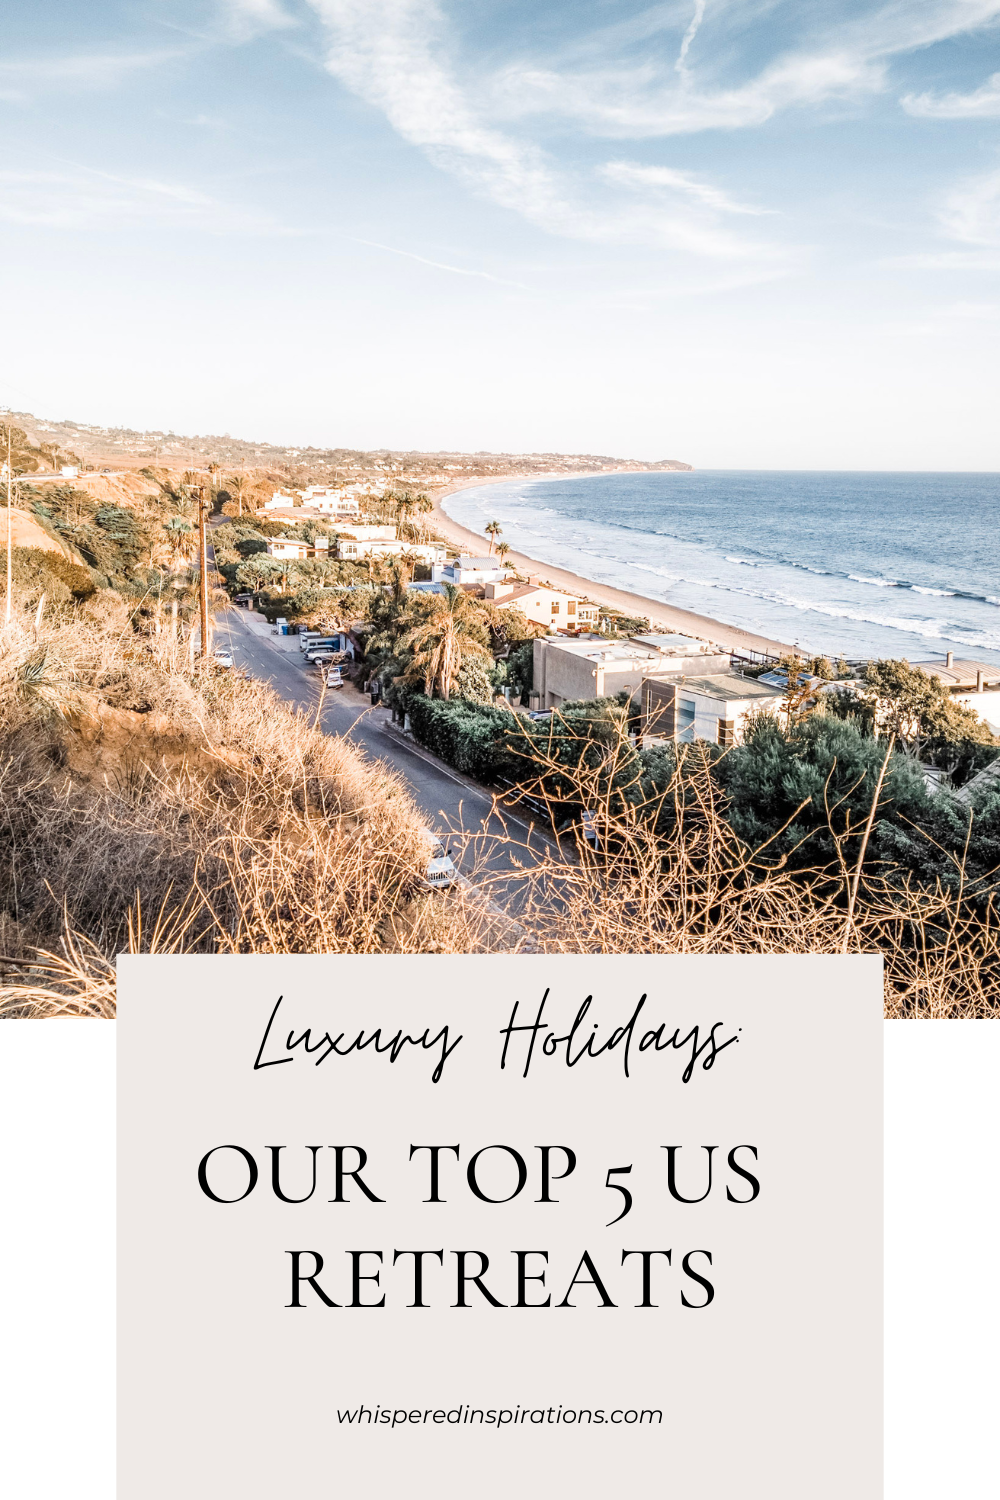 The beautiful coastline of Malibu lined with homes and beach. This article covers top five US retreats.